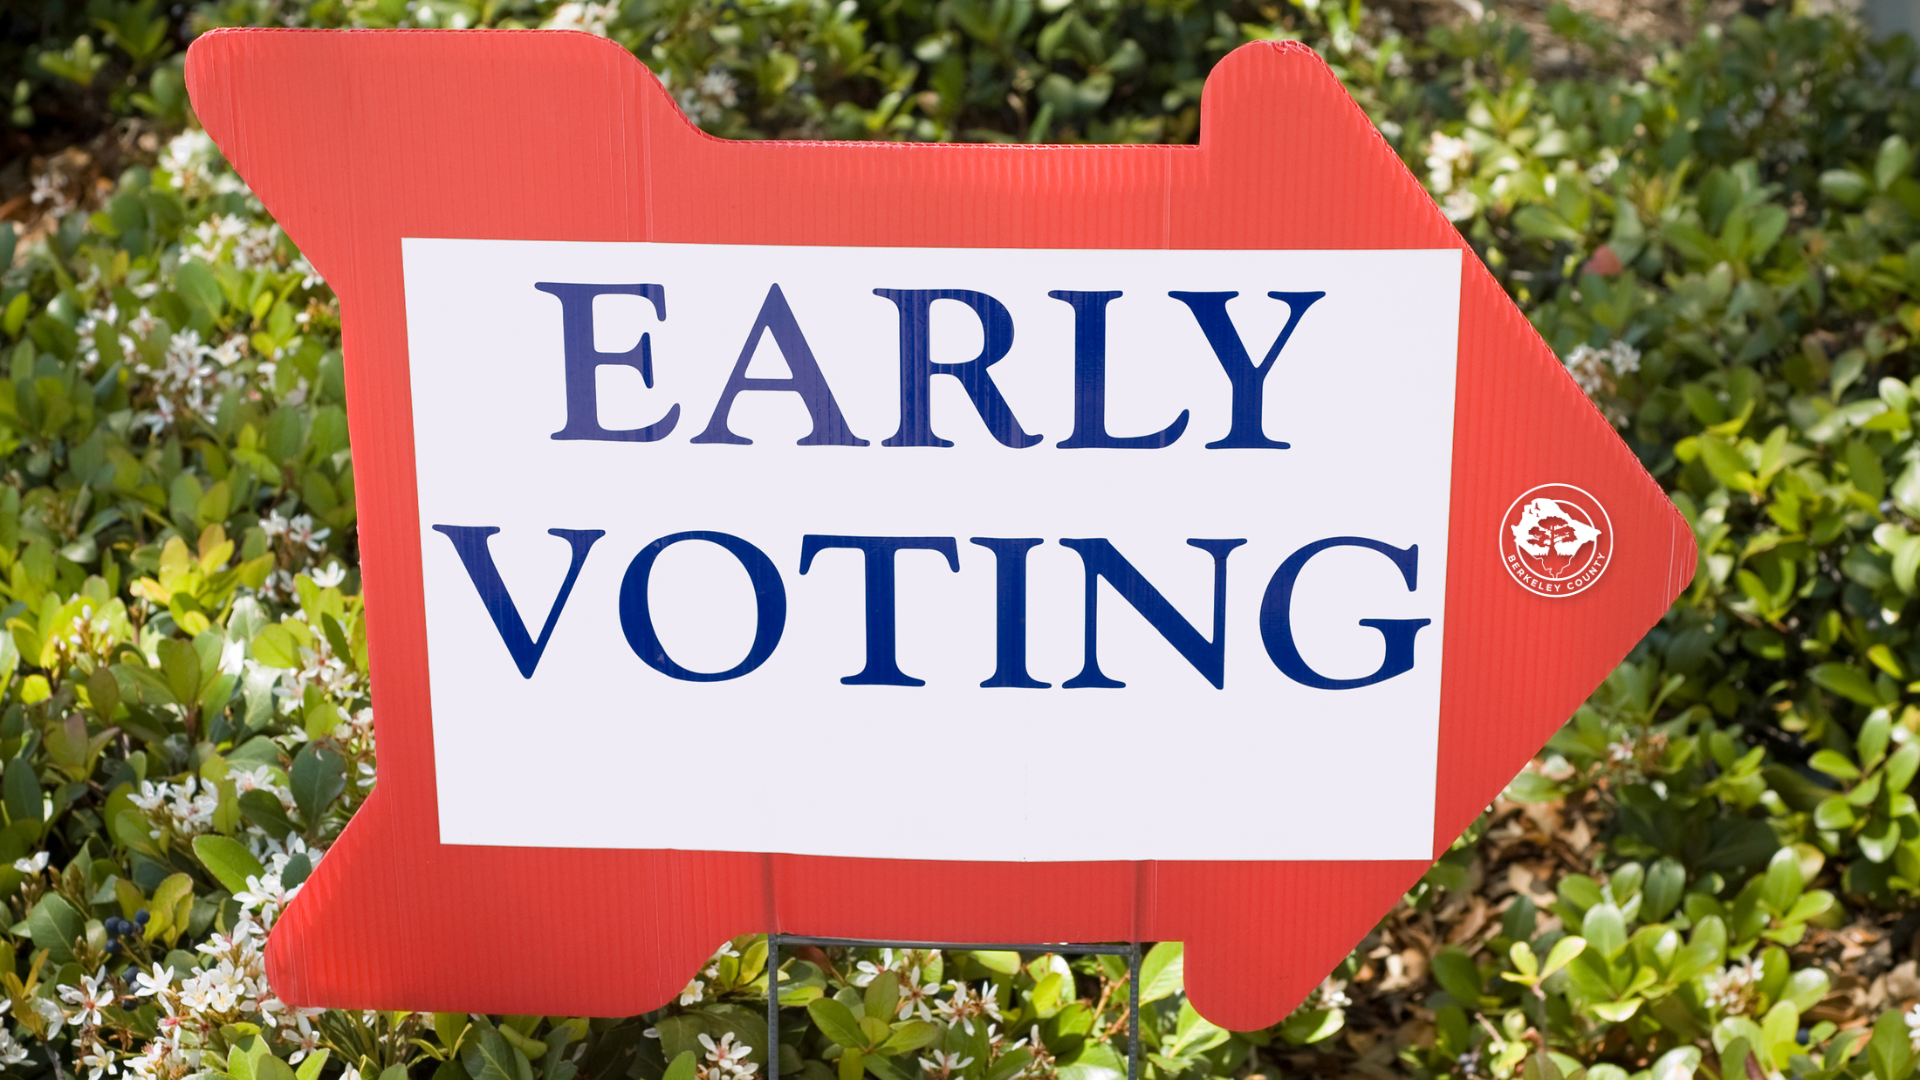 Berkeley County Early Voting Info. for Republican Presidential Preference Primary